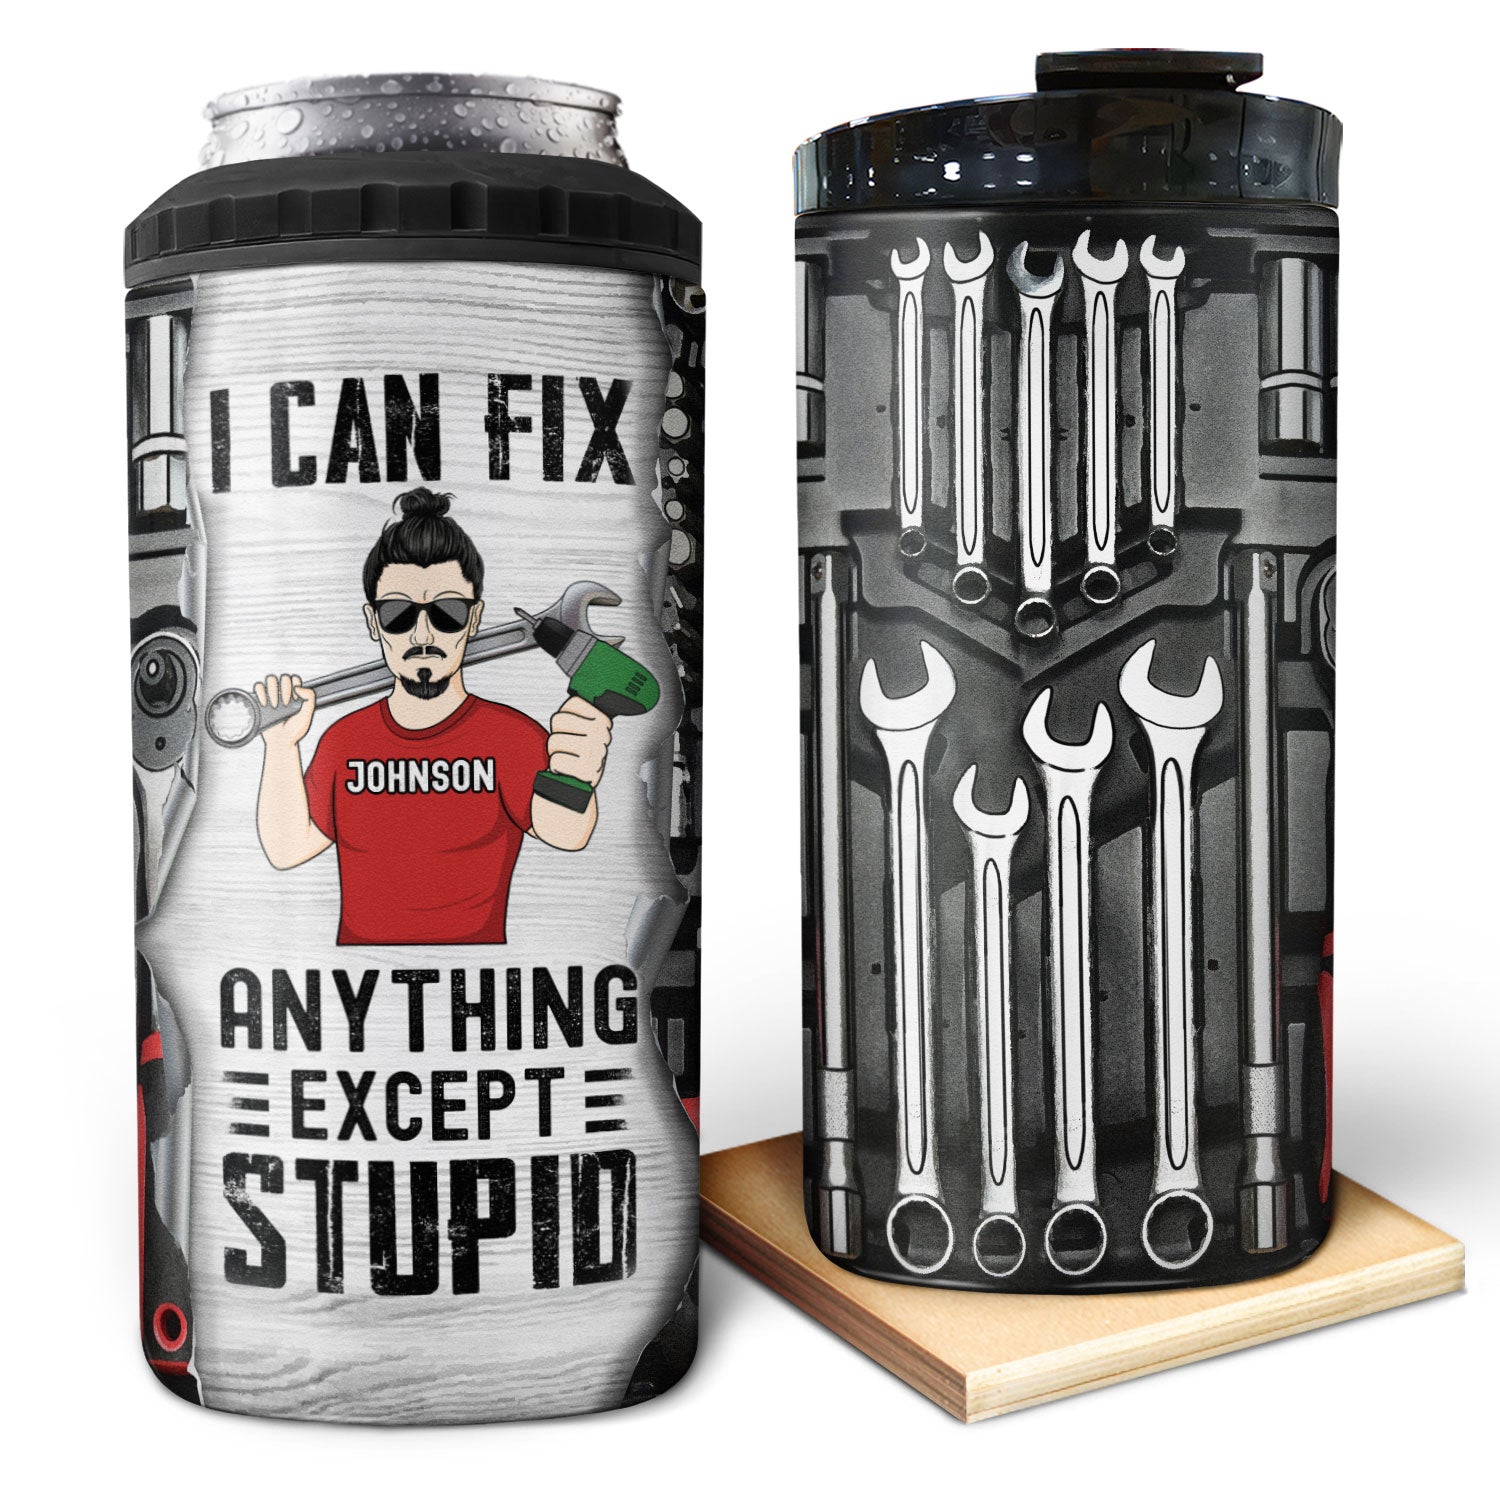 Mechanics I Can Fix Anything Except Stupid - Gift For Dad, Father, Grandfather, Grandpa, Men - Personalized Custom 4 In 1 Can Cooler Tumbler